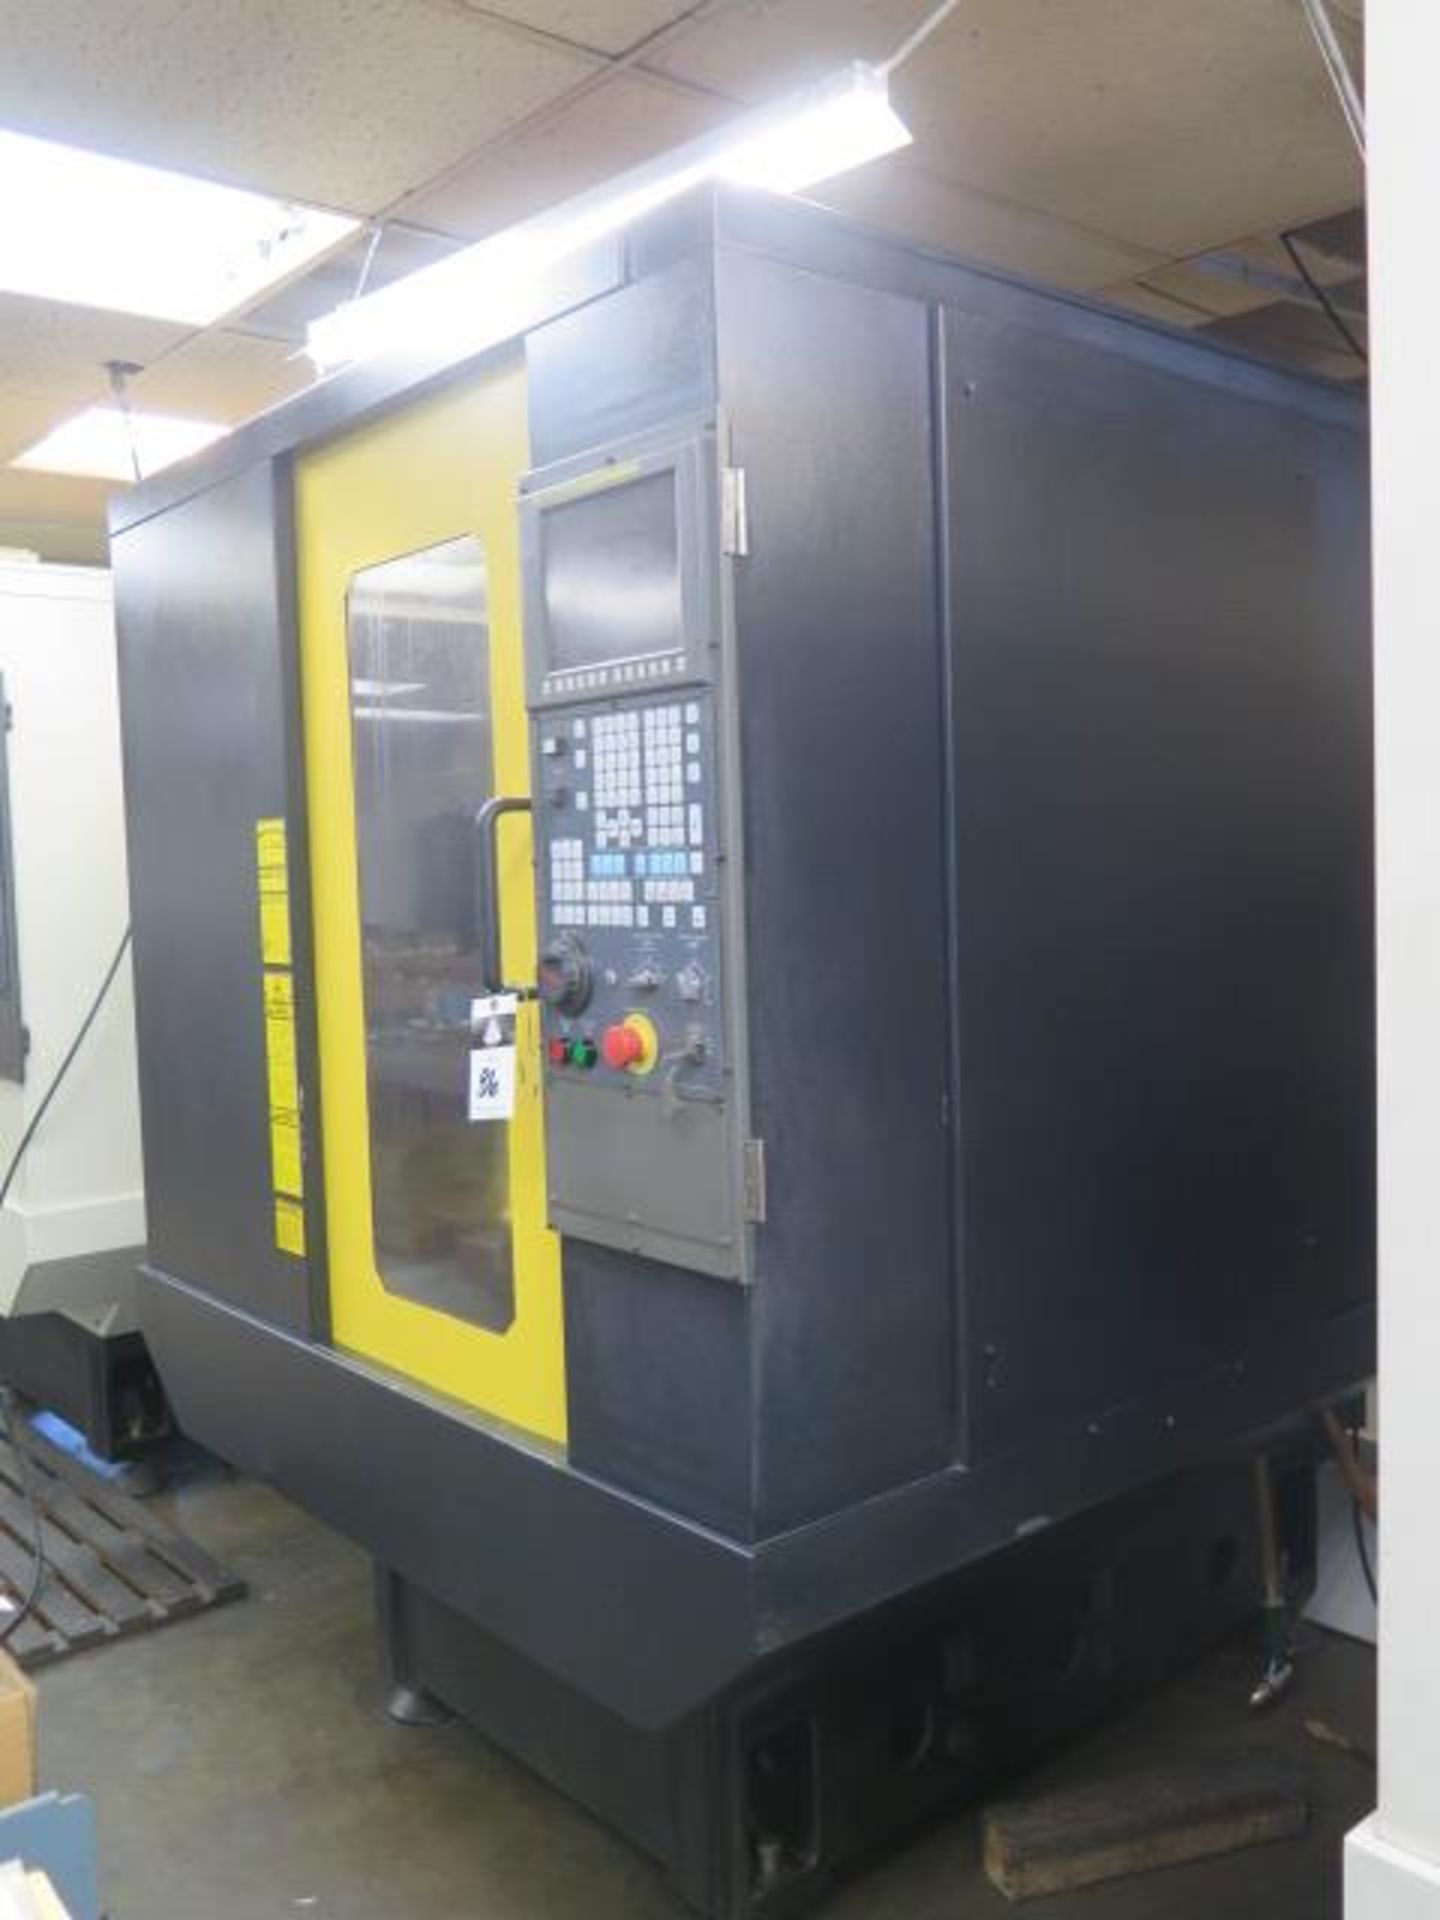 2007 Fanuc Robodrill MATE CNC Drilling Center s/n P07XVN440 w/ Fanuc Series 0i-MC, SOLD AS IS - Image 3 of 12